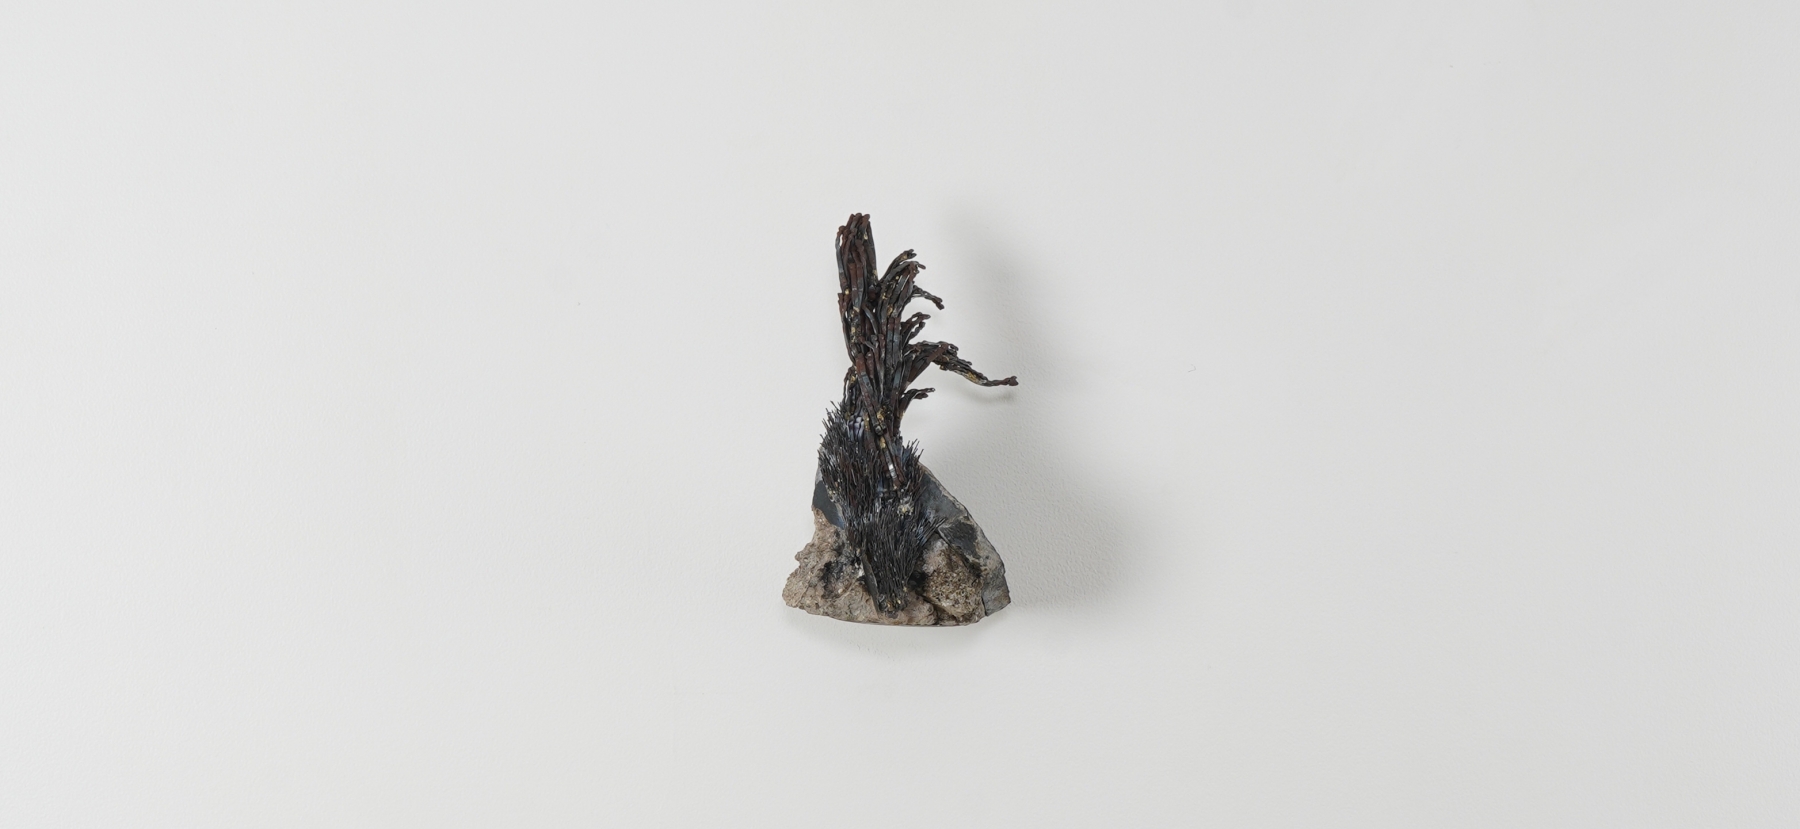 SAKSHI GUPTA,&amp;nbsp;Exposed on the Cliffs of the Heart II,&amp;nbsp;2021, rubble and metal scrap,

9.4 x 5.1 x 4.7 in / 24 x 13 x 12 cm